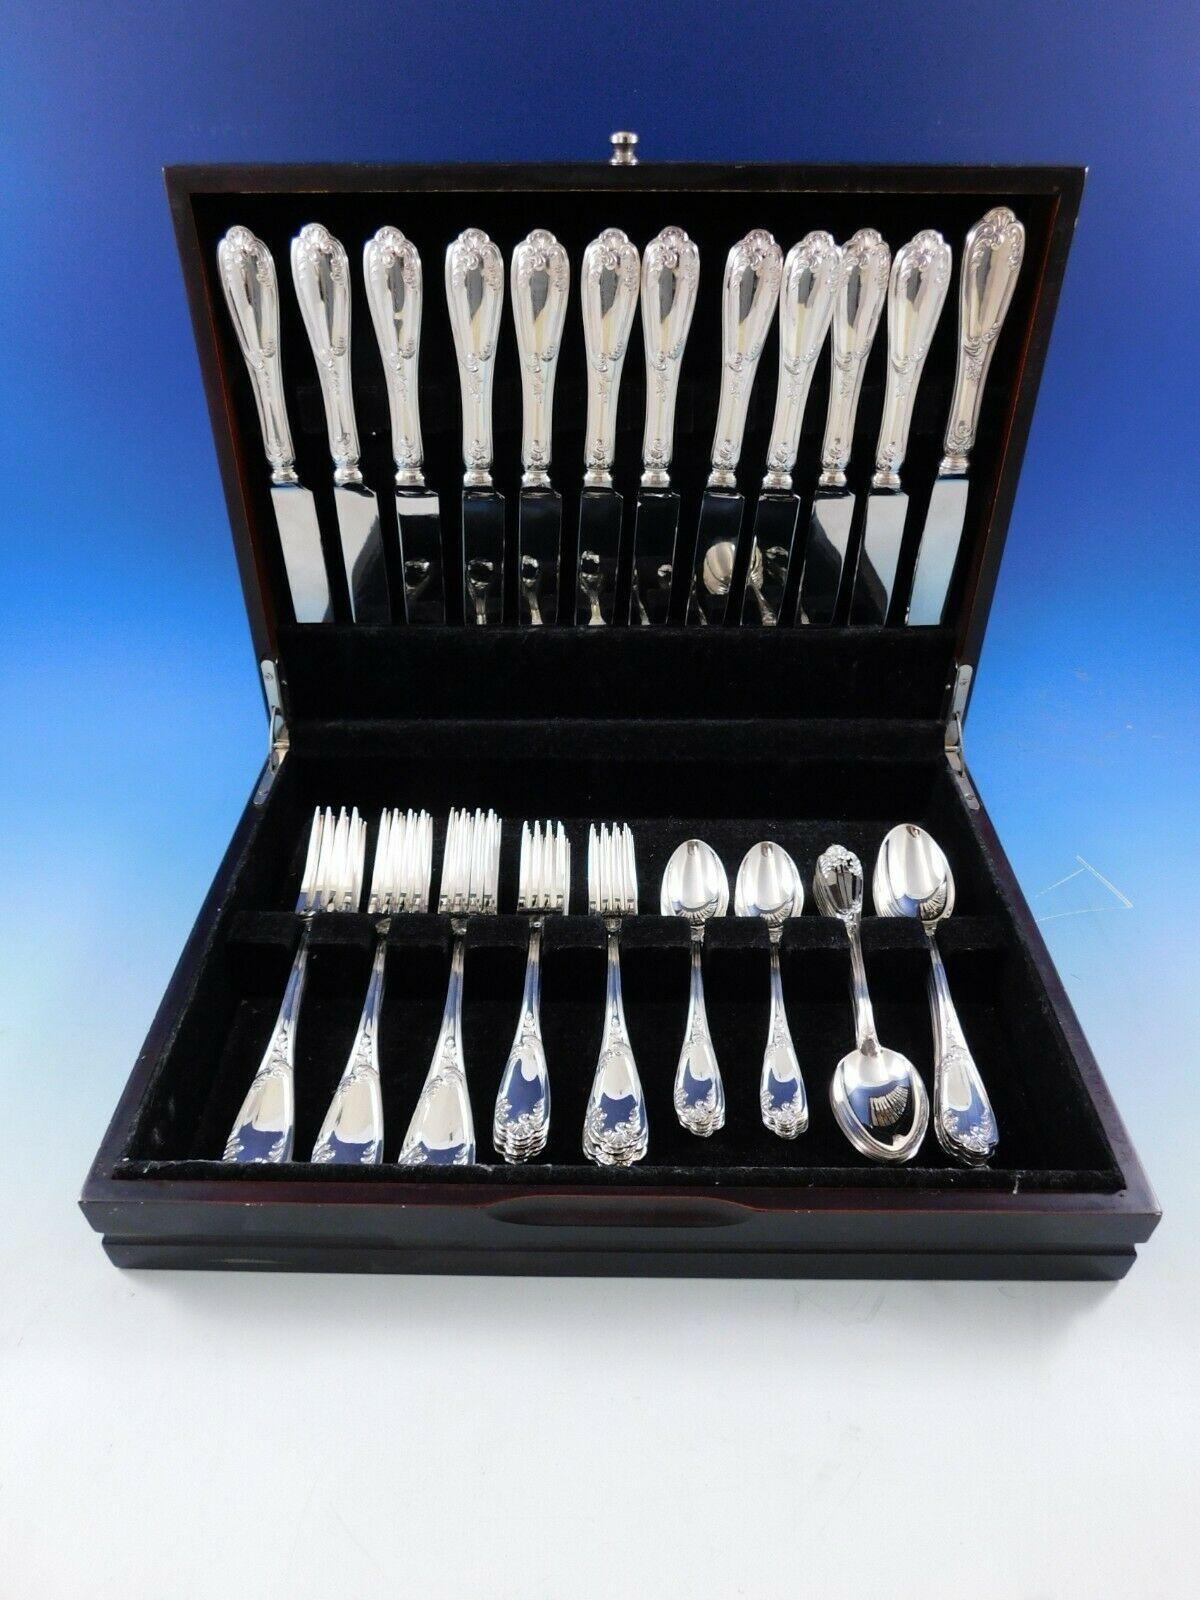 Unused continental size Venezia by Fortunoff Italy sterling silver flatware set, 60 pieces. This set includes:

12 continental size knives, 9 7/8